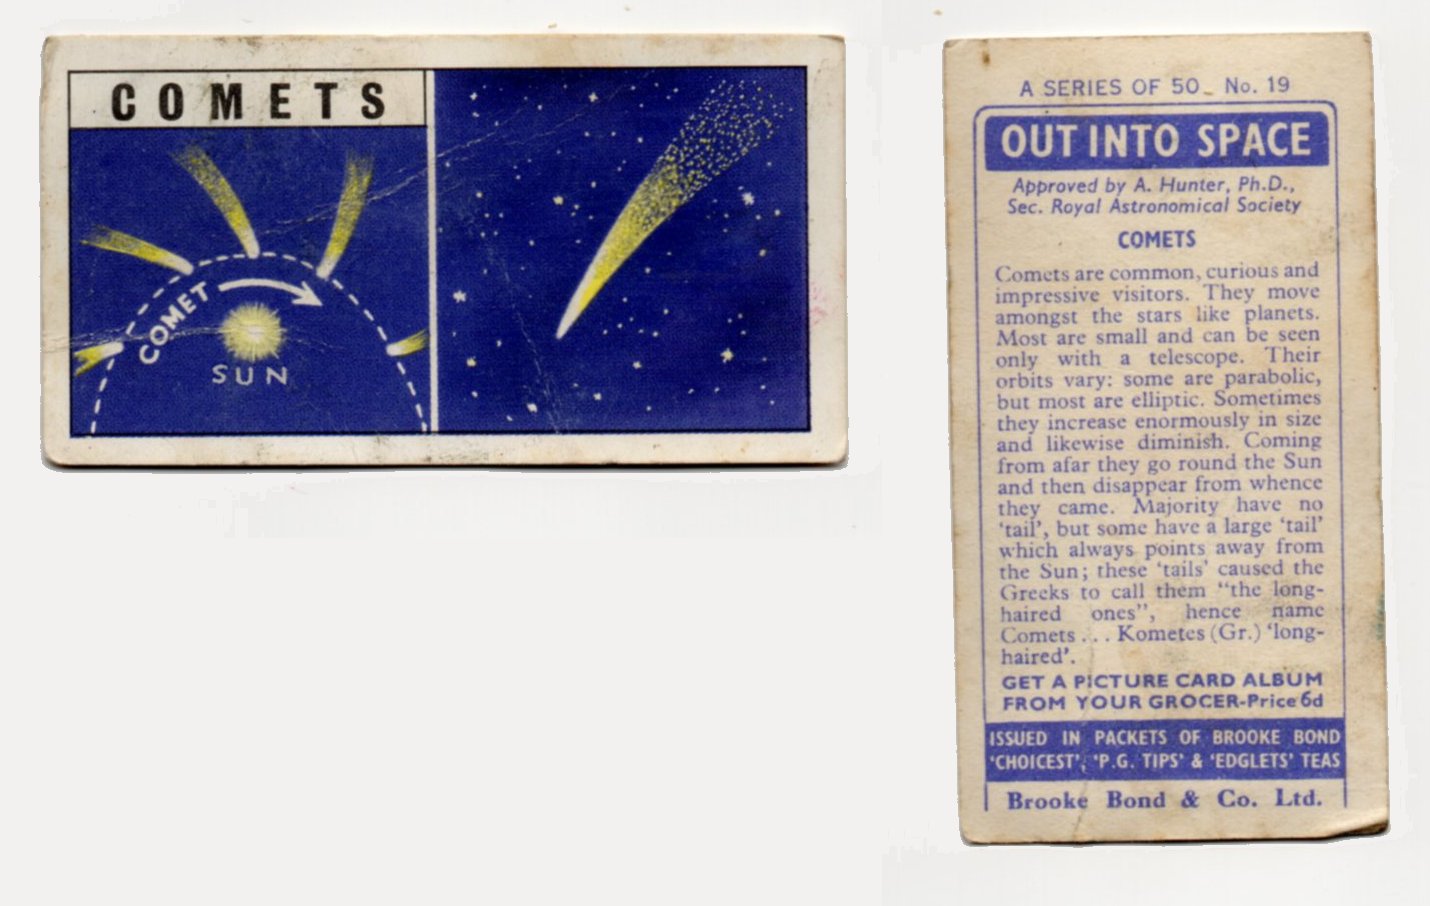 Brooke Bond Out Into Space #19 Comets CC0245.jpg  by whitetaylor